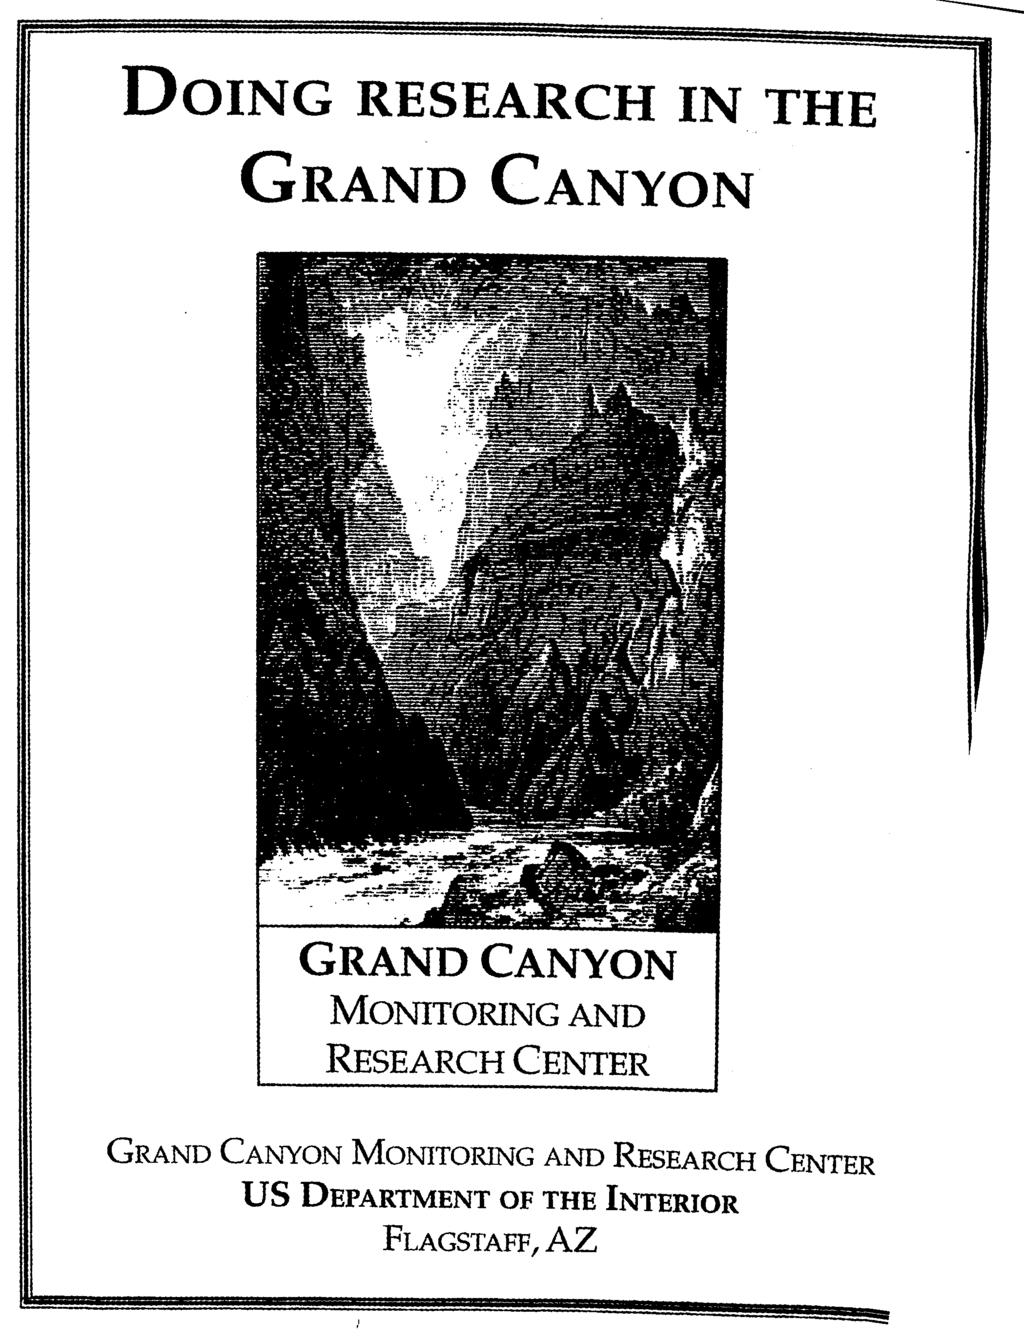 DOING RESEARCH IN THE GRAND CANYON 1 MONITORING AND I GRAND CANYON